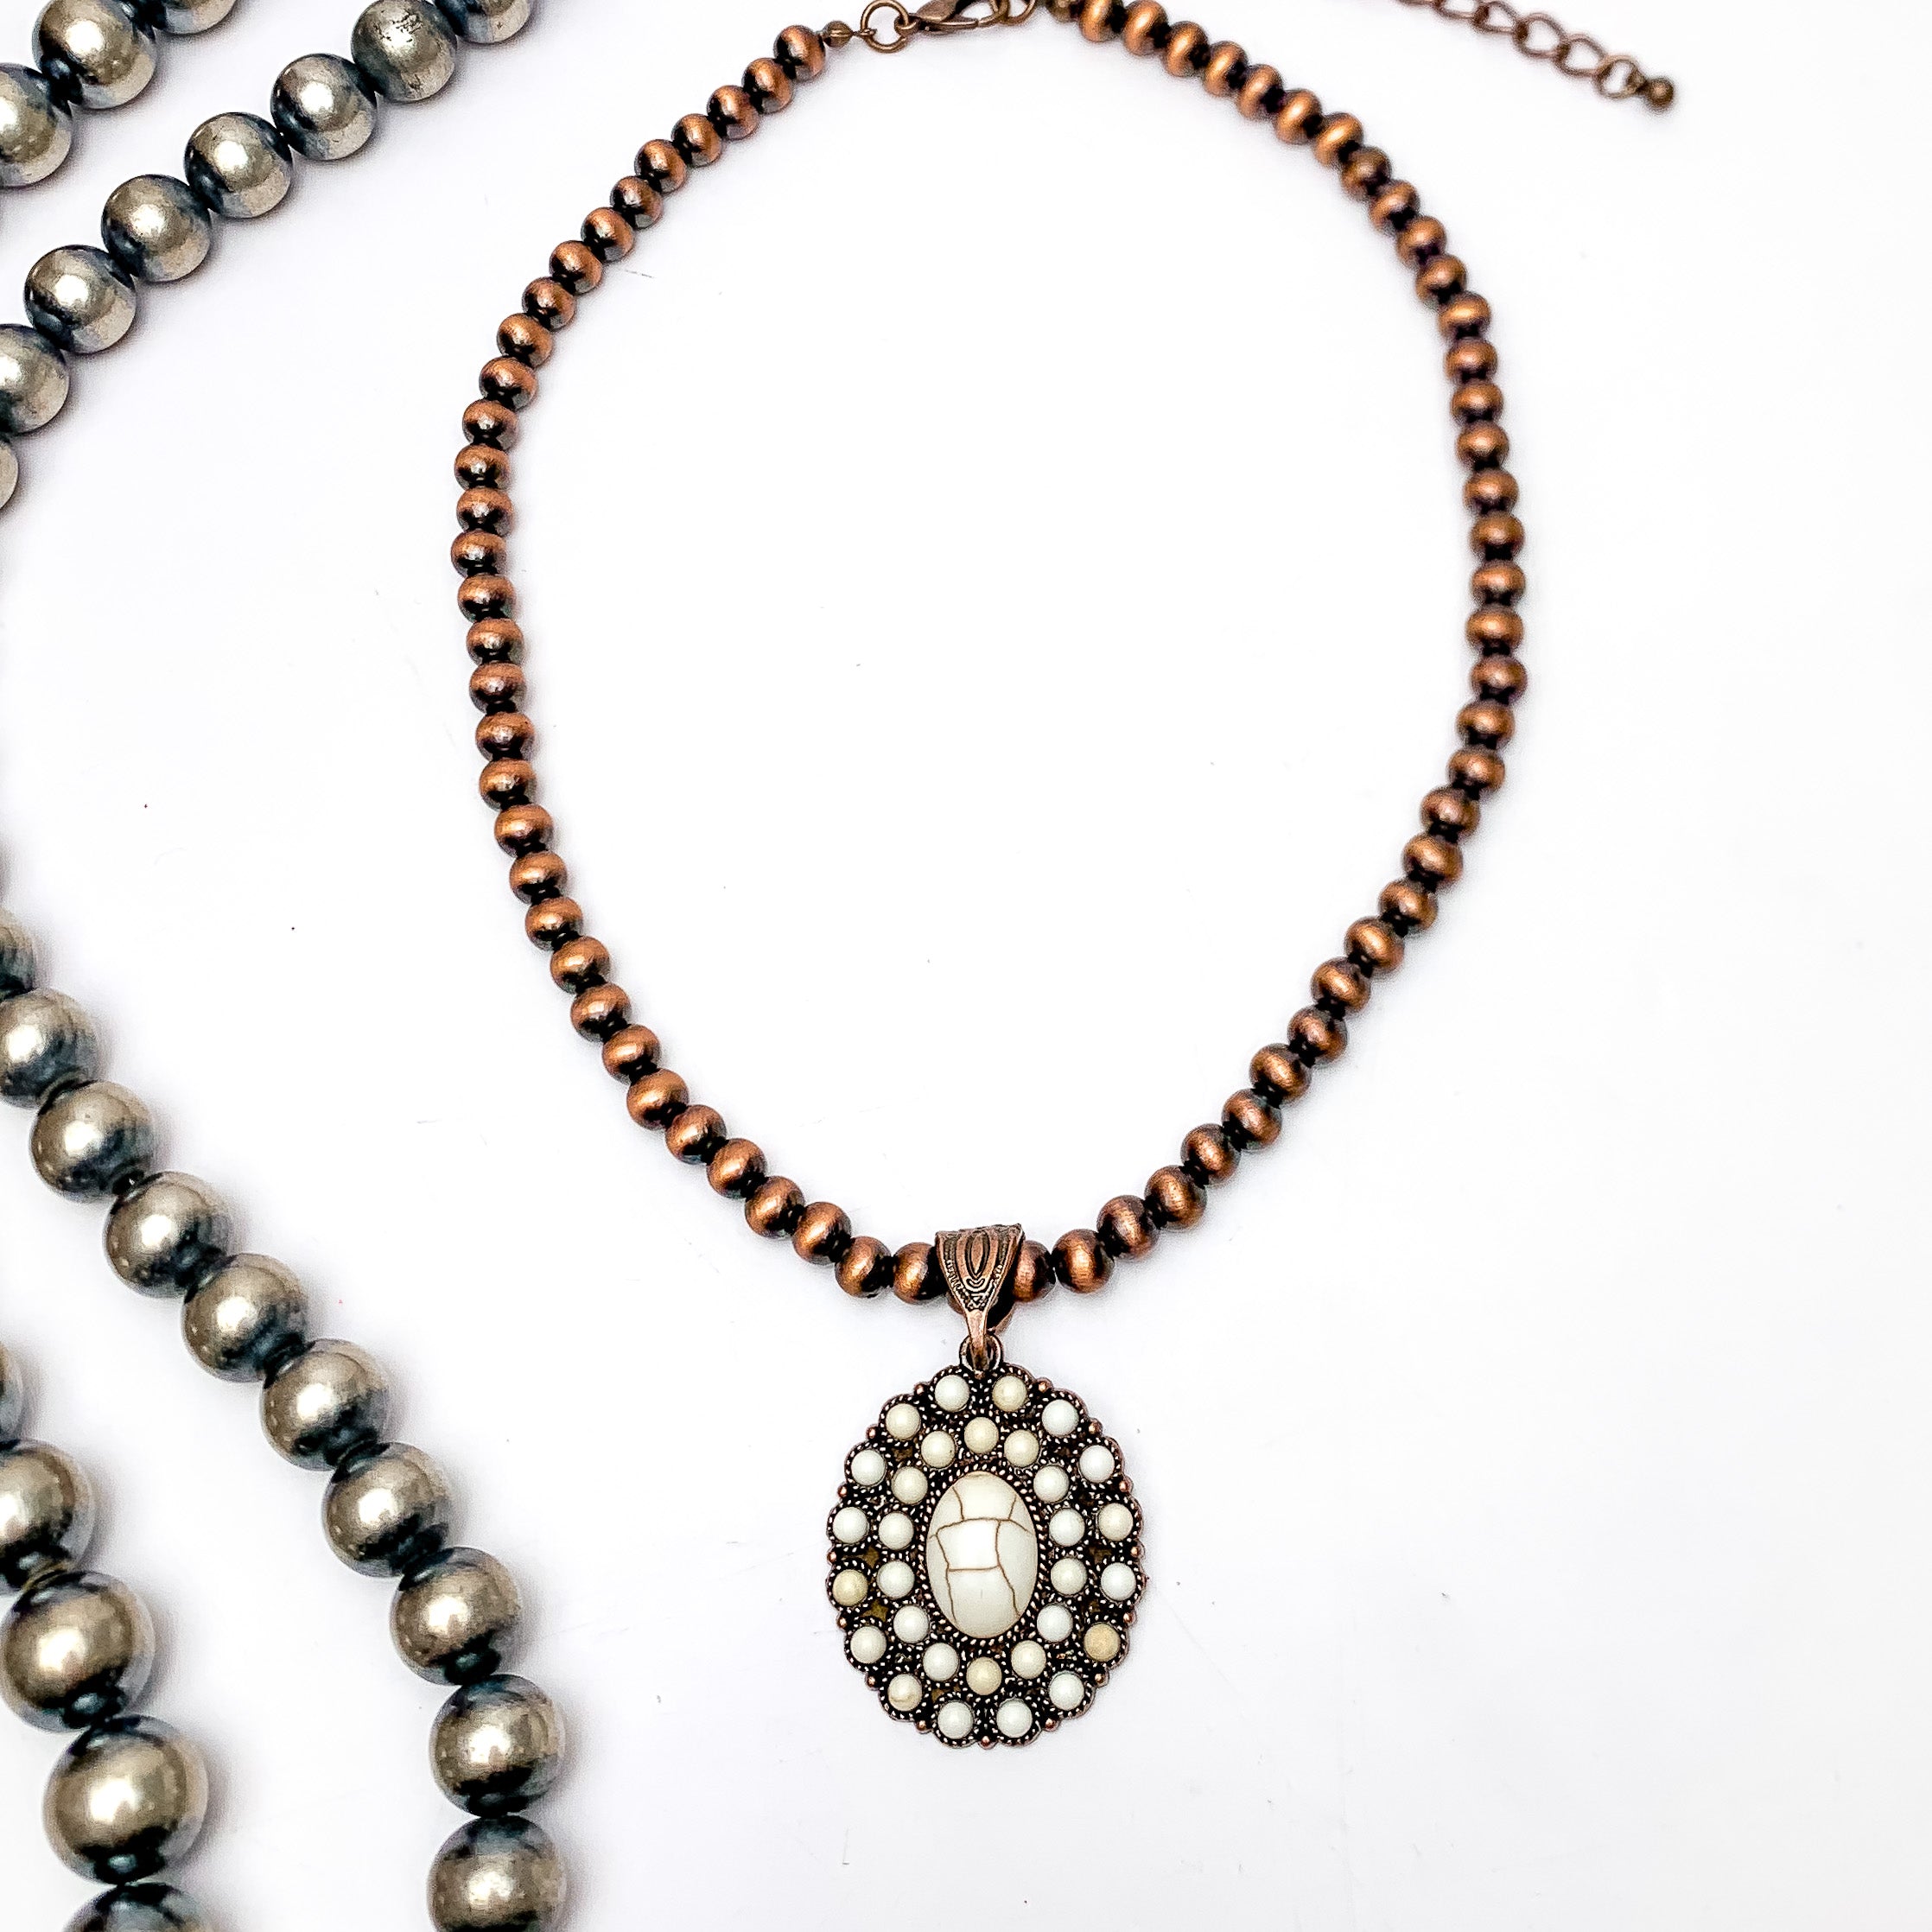 Copper Tone Pearl Necklace With Stone Cluster Pendent in Ivory. Pictured on a white background with Navajo pearls on the left side of the necklace.